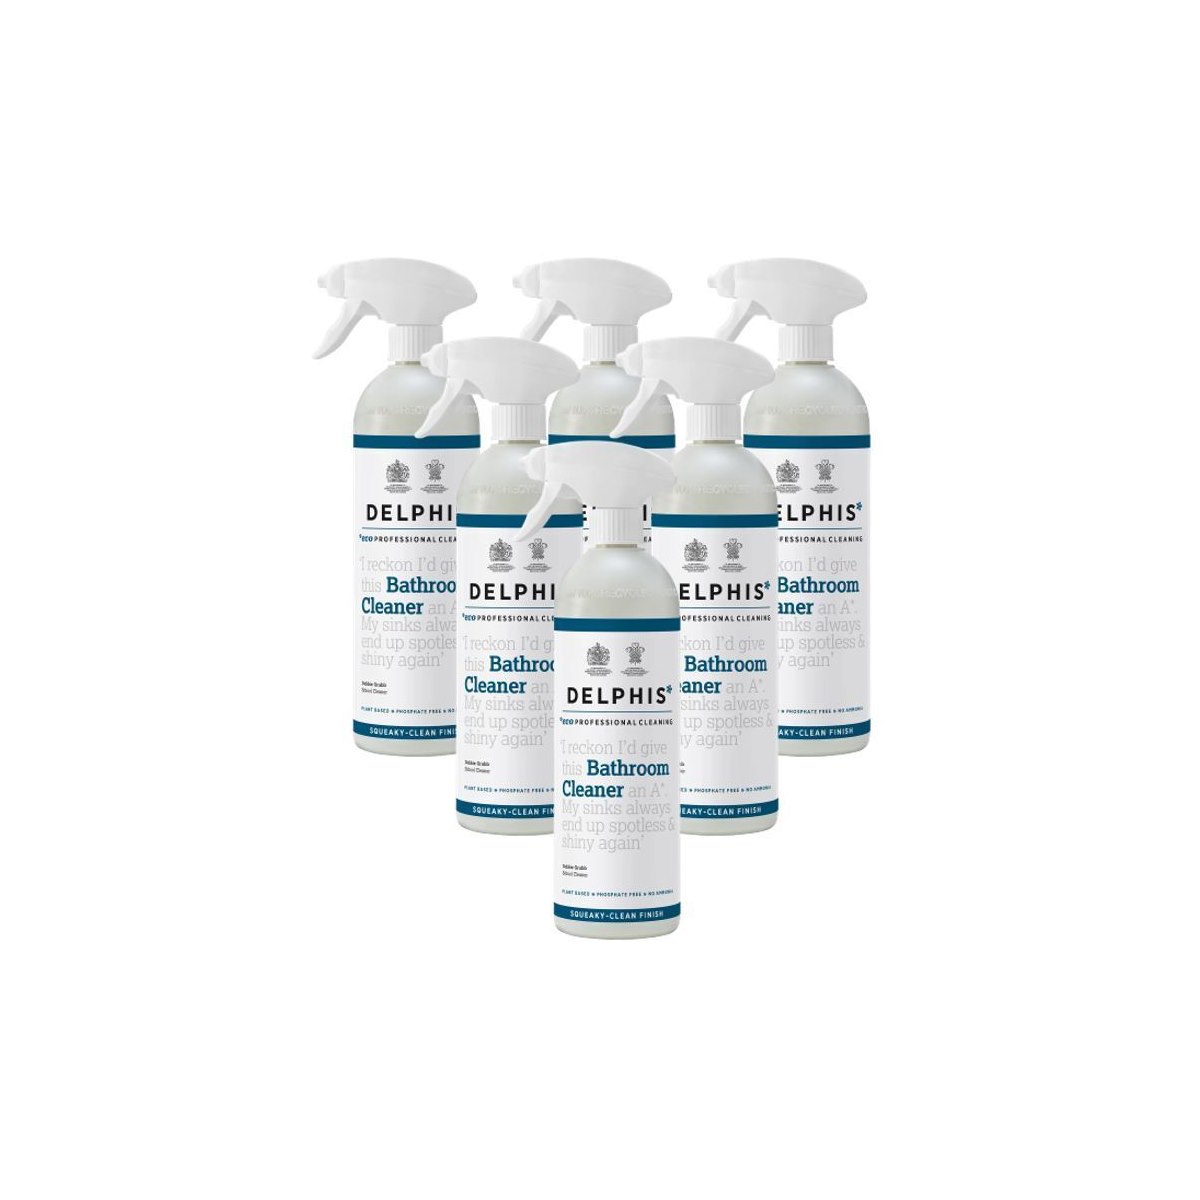 Case of 6 x Delphis Eco Professional Cleaning Bathroom Cleaner Spray 700ml